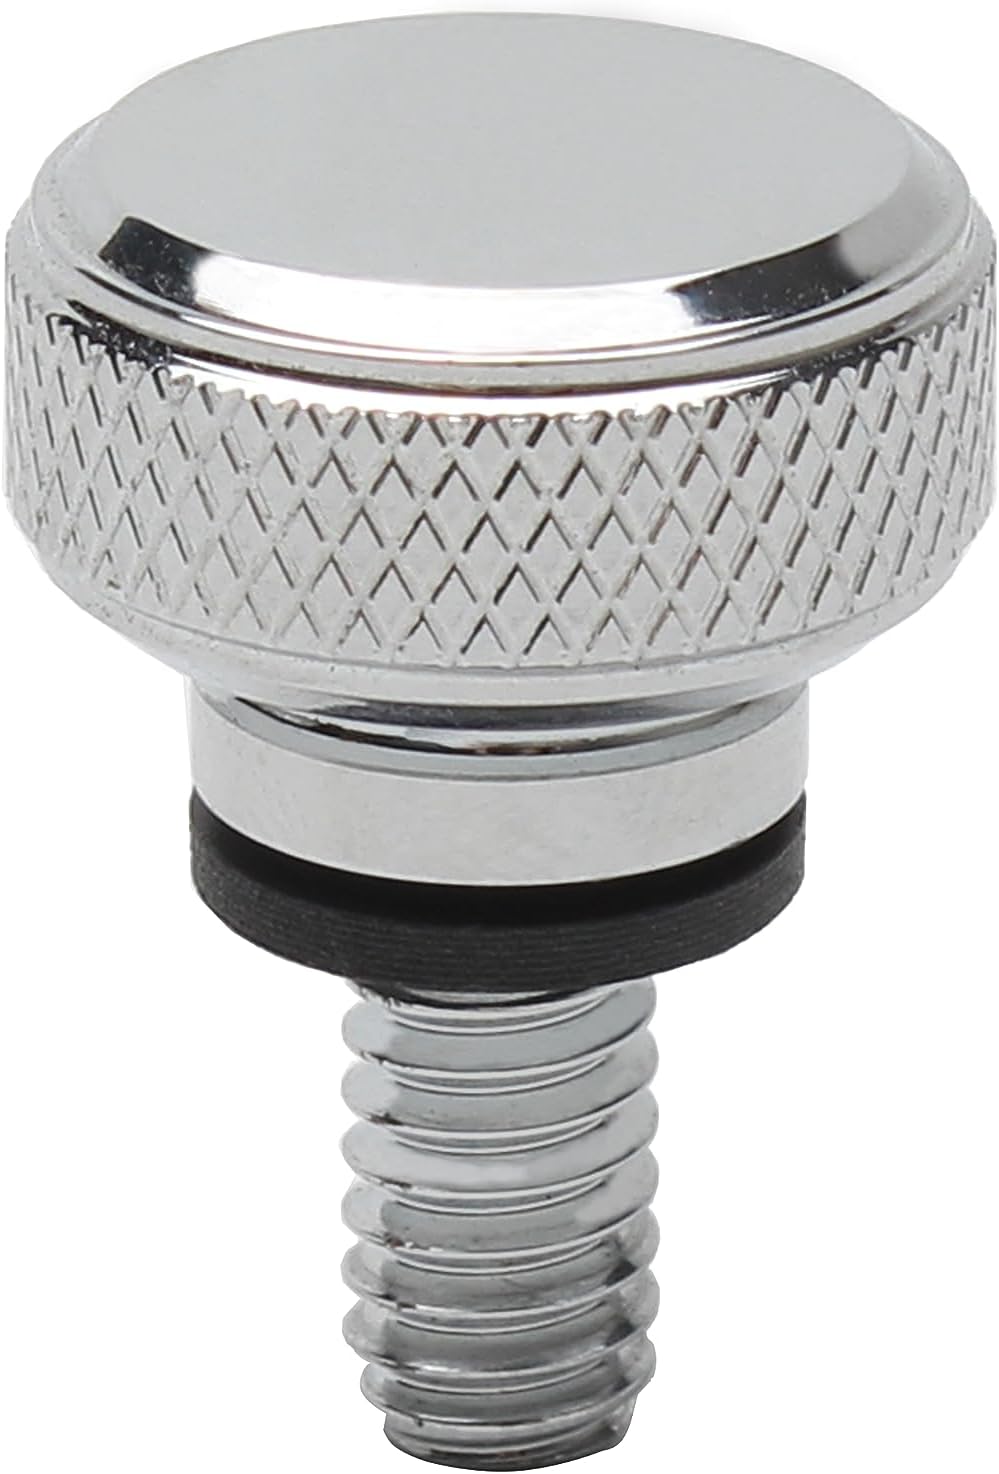 Fenrir Motorcycle Seat Bolt Screw Review